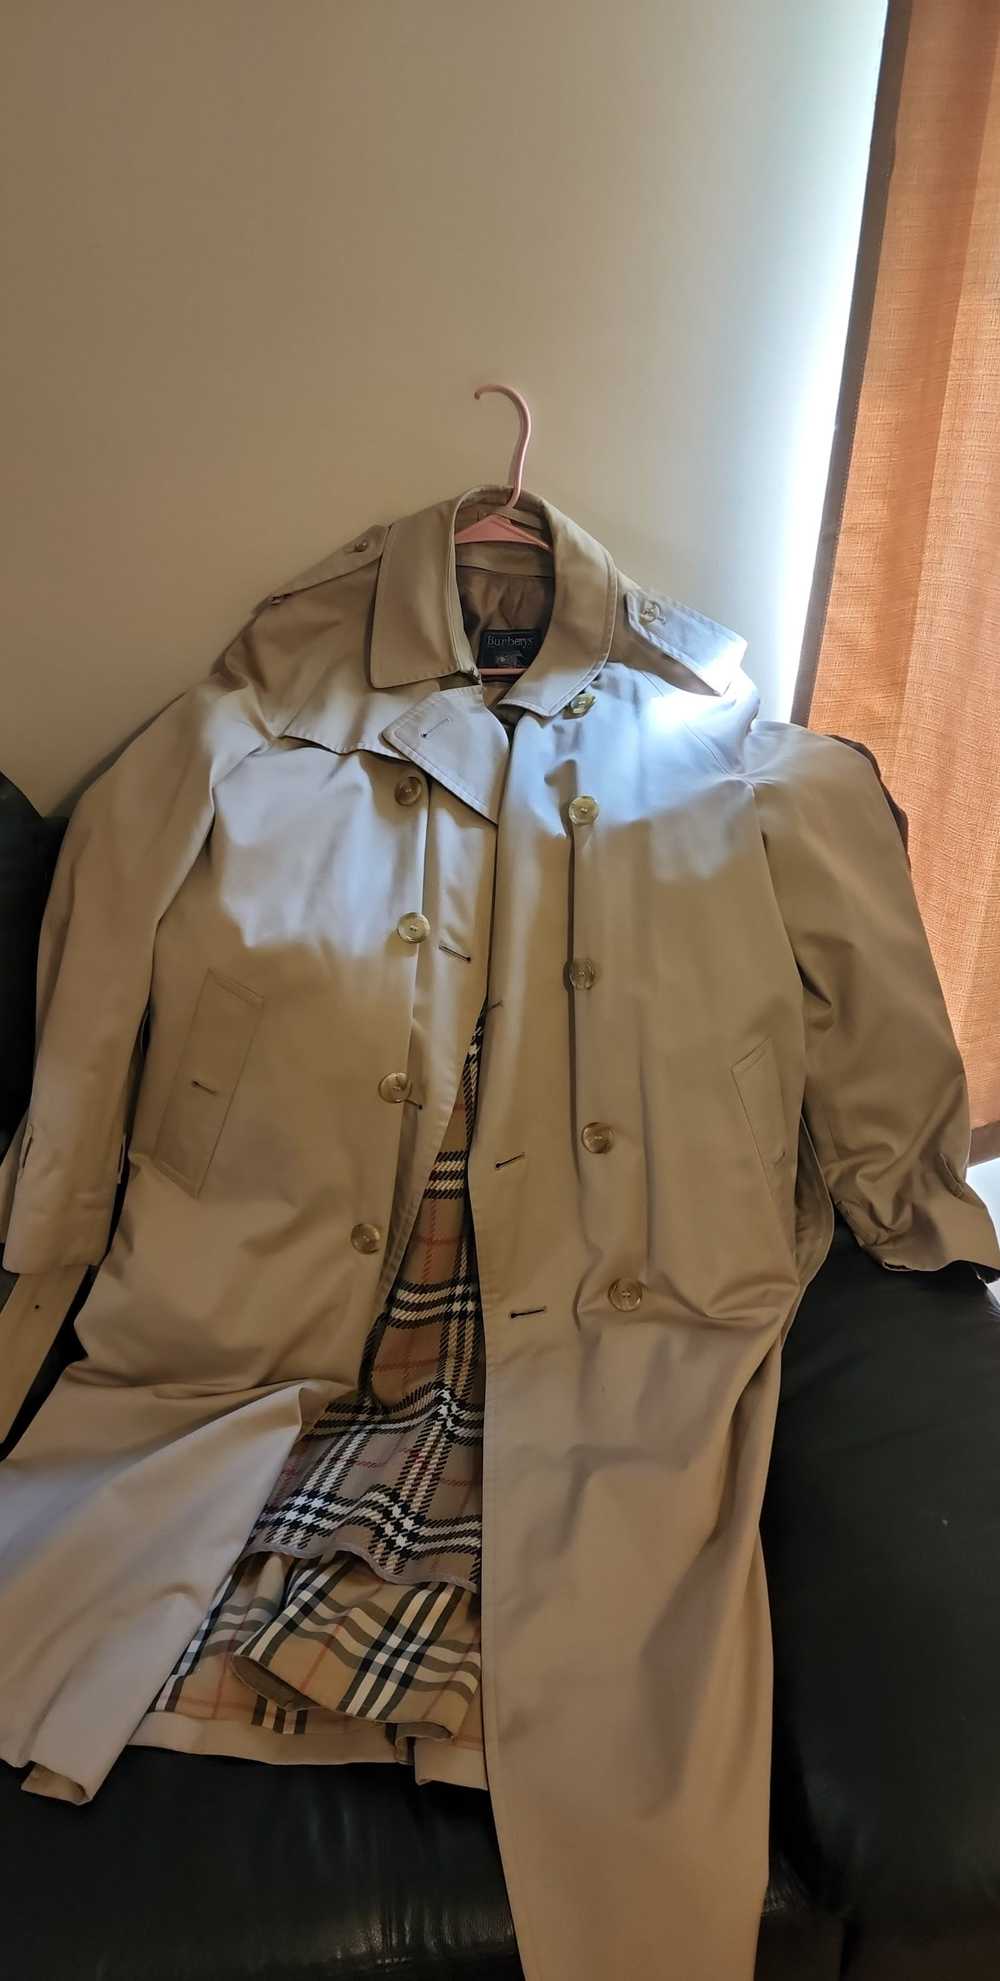 Burberry Burberry Trench Coat - image 1